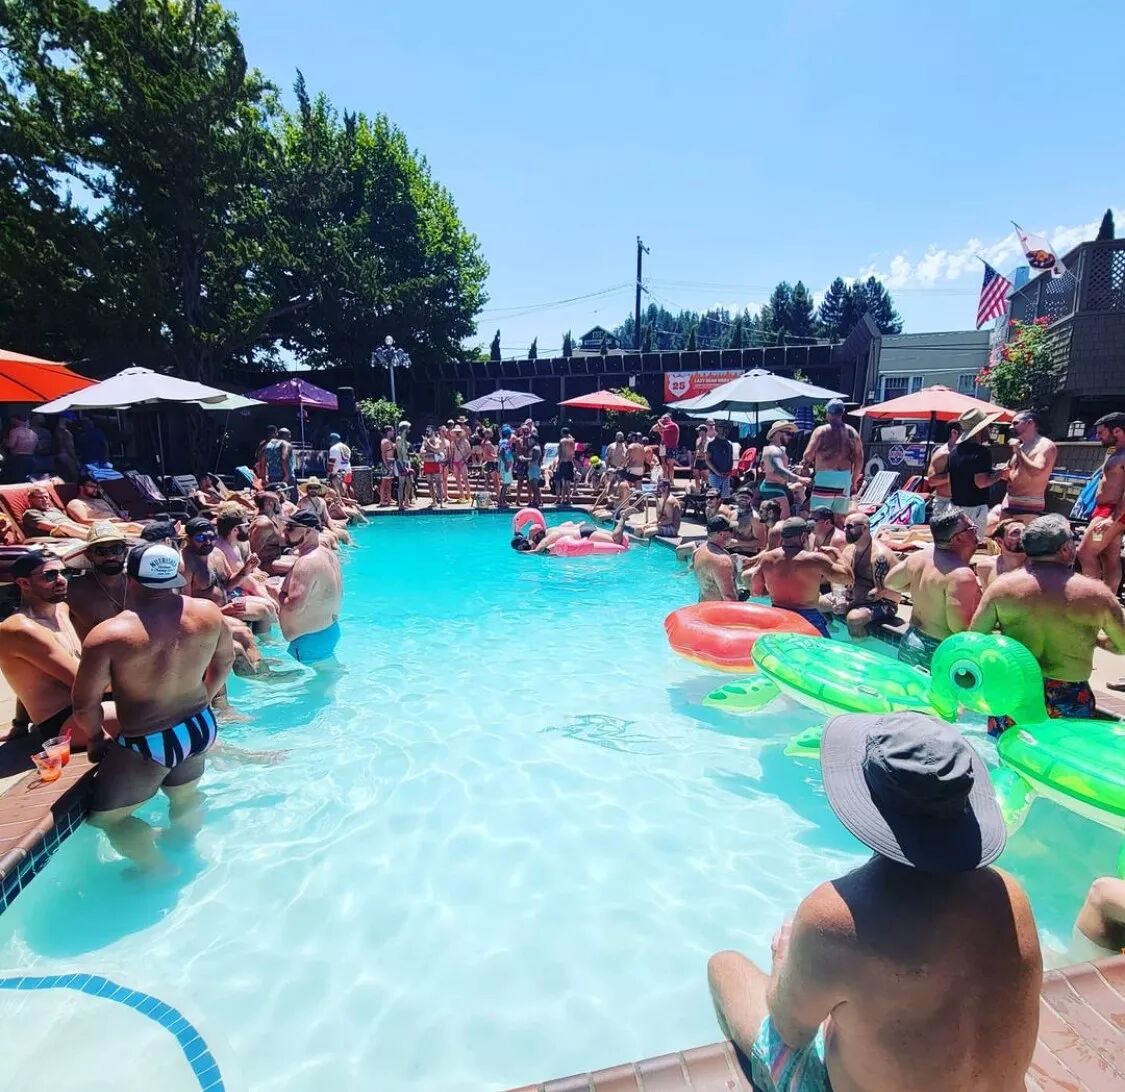 A packed pool party